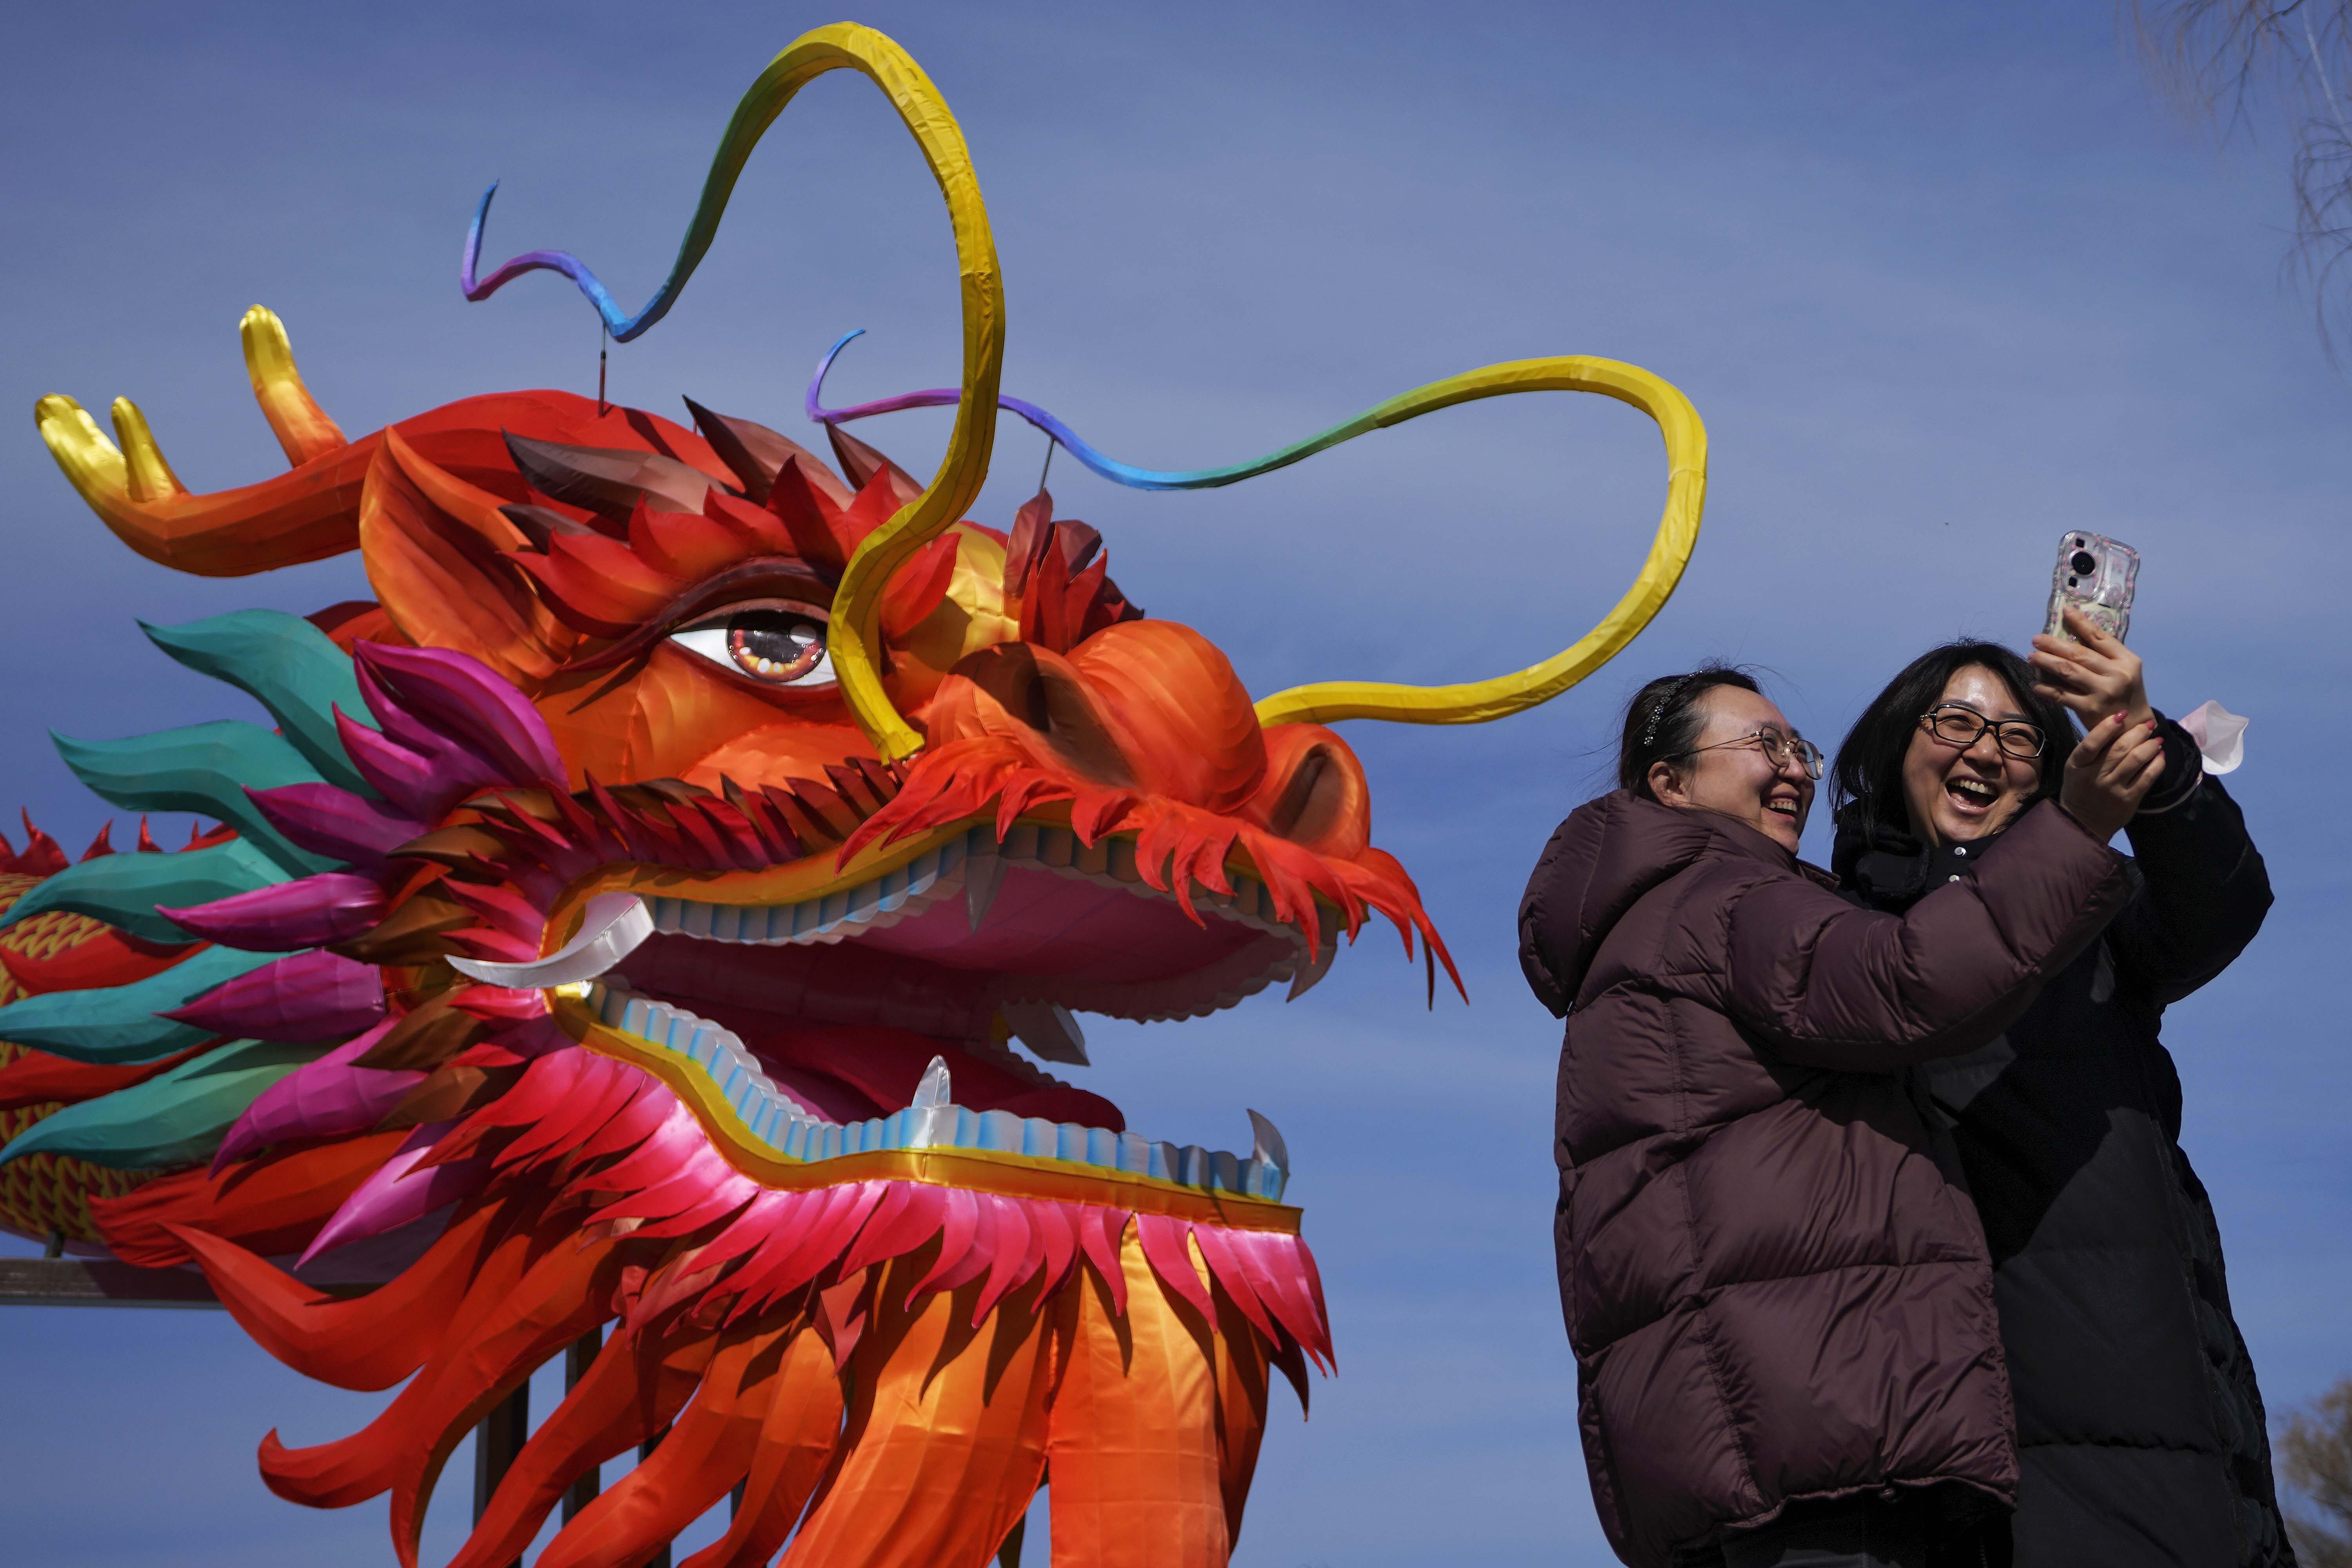 As Lunar New Year dawns across Asia, a blue dragon takes wing